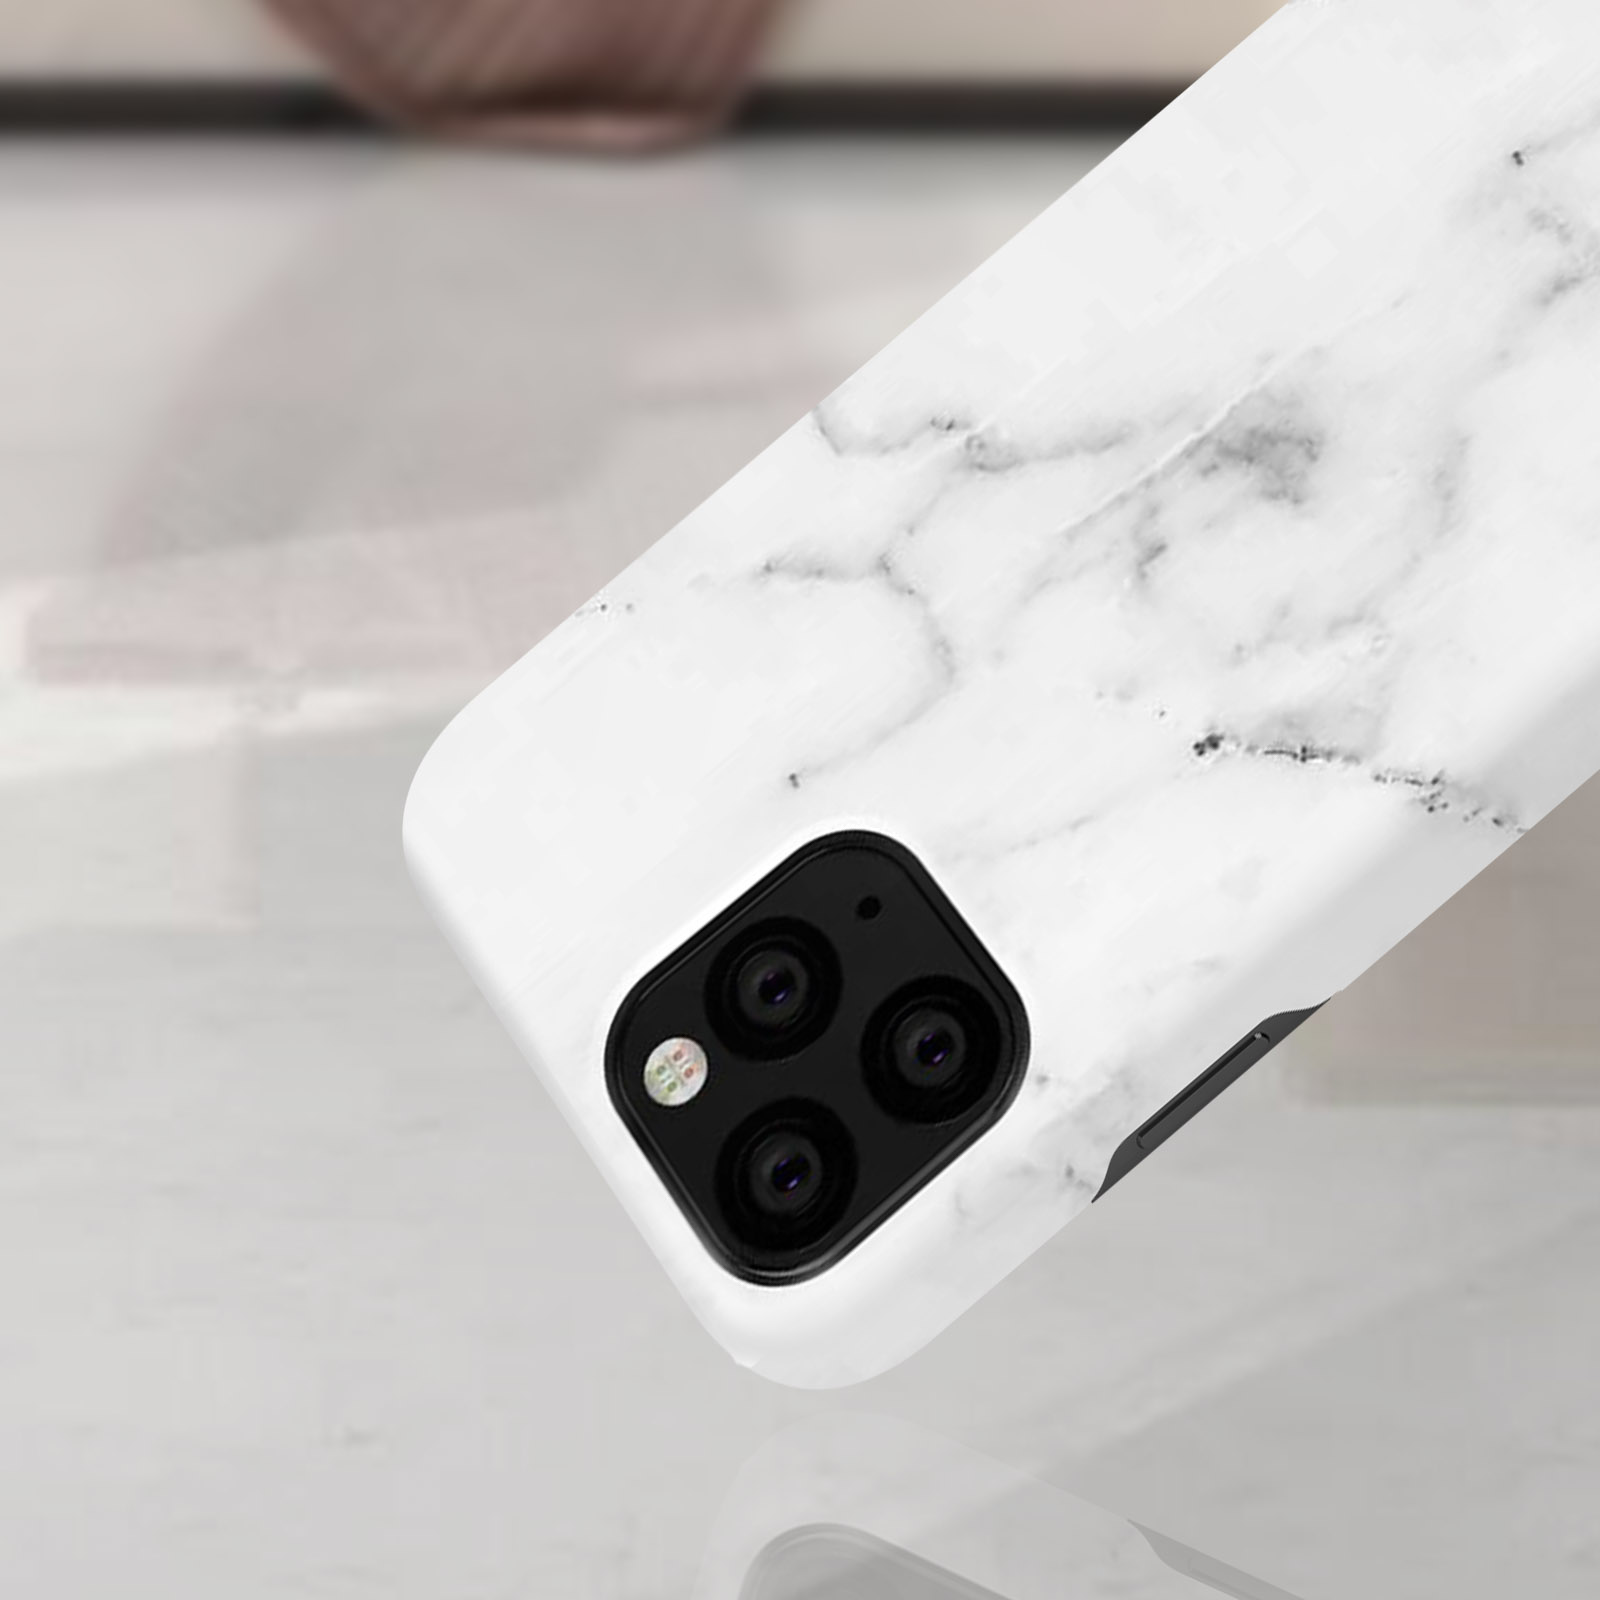 IDEAL OF Apple iPhone Backcover, iPhone Apple, 11 Apple Max, SWEDEN Pro IDFC-I1965-22, Marble XS White Max